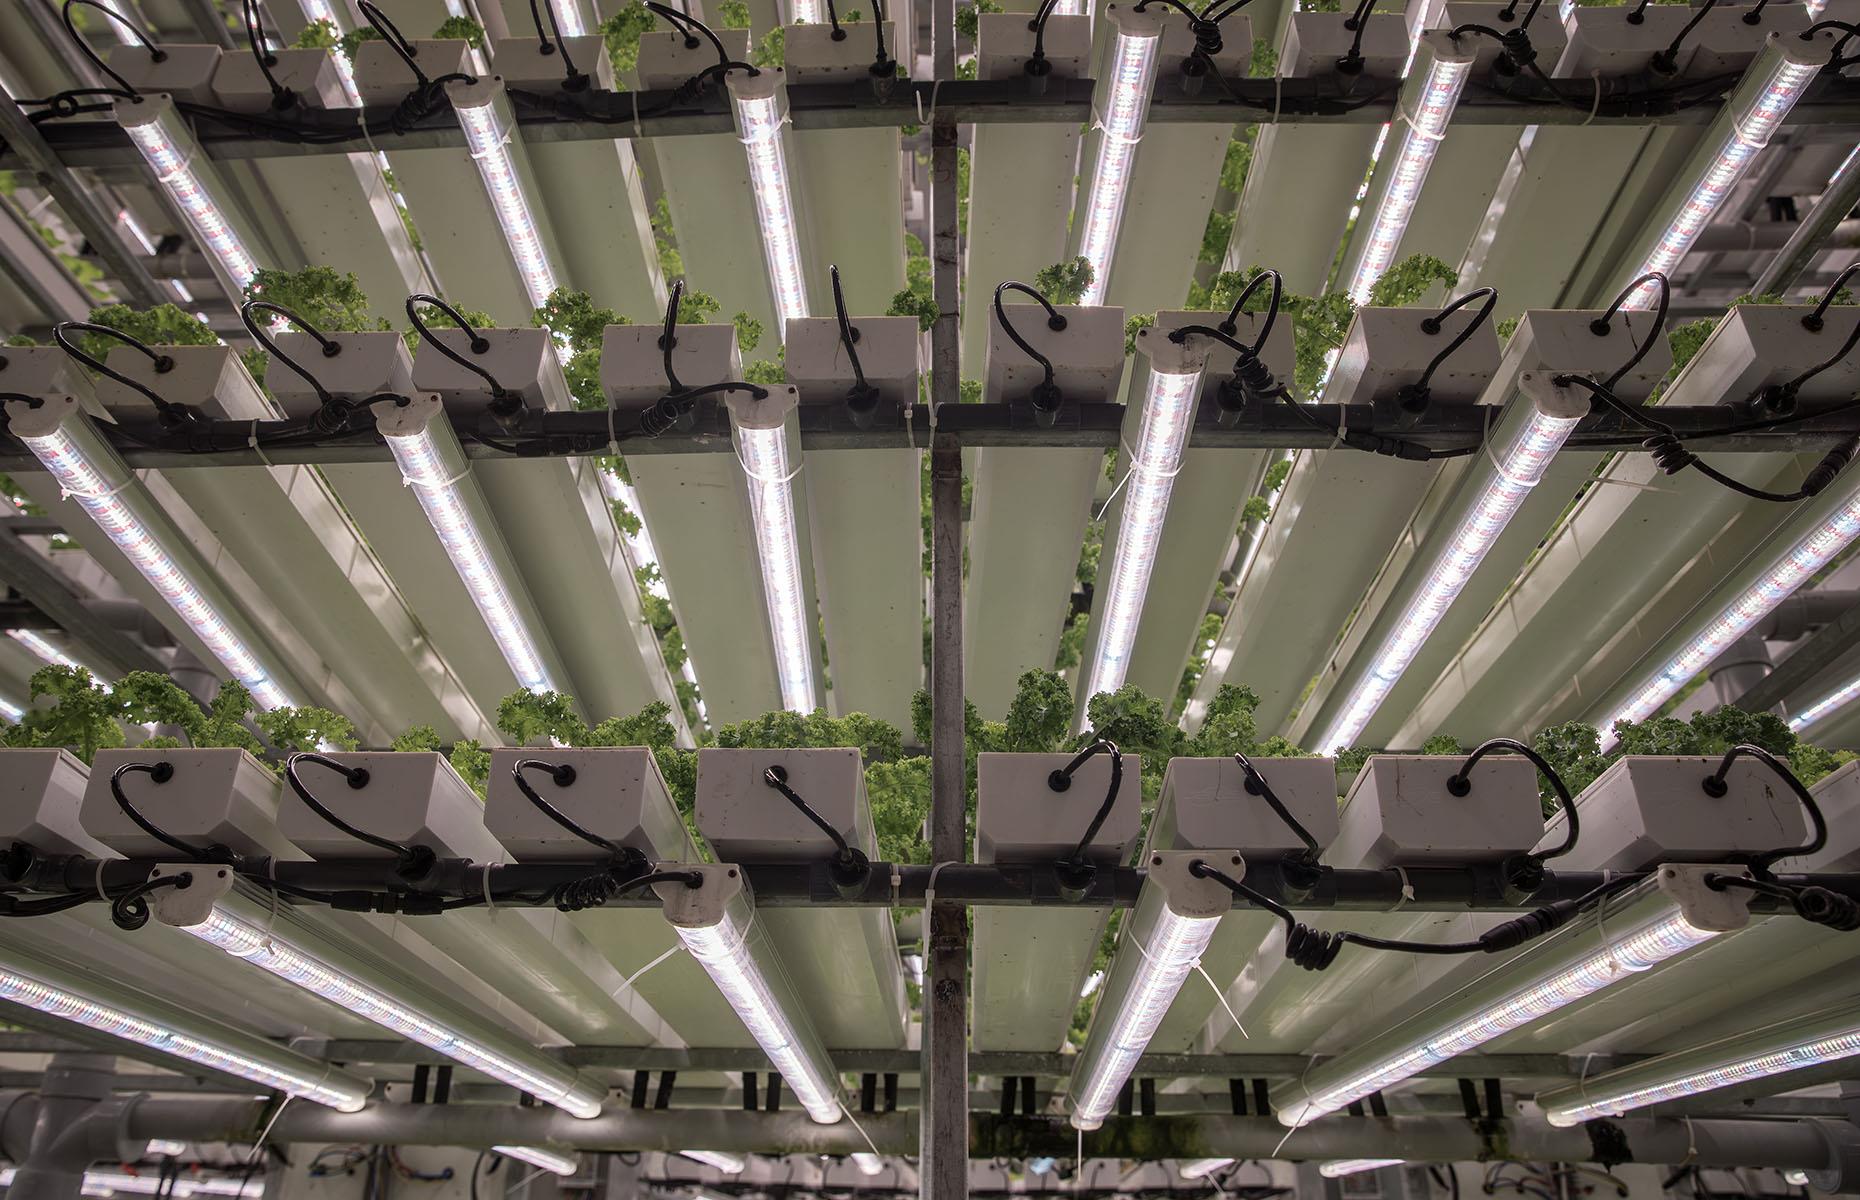 <p>The world's first robot farm launched in Japan in 2017. Owned by a company called Spread, the vegetable factory is an indoor hydroponic farm factory that's designed to produce around 30,000 lettuces a day by 2030, with minimal cost and human input required. Robots water, feed, harvest, and transplant the crops: in fact, they do everything apart from sow the seeds.</p>  <p>Elsewhere, robots are also being used to pick fruit such as strawberries, using sensors to choose the ripest berries to reduce food waste. </p>